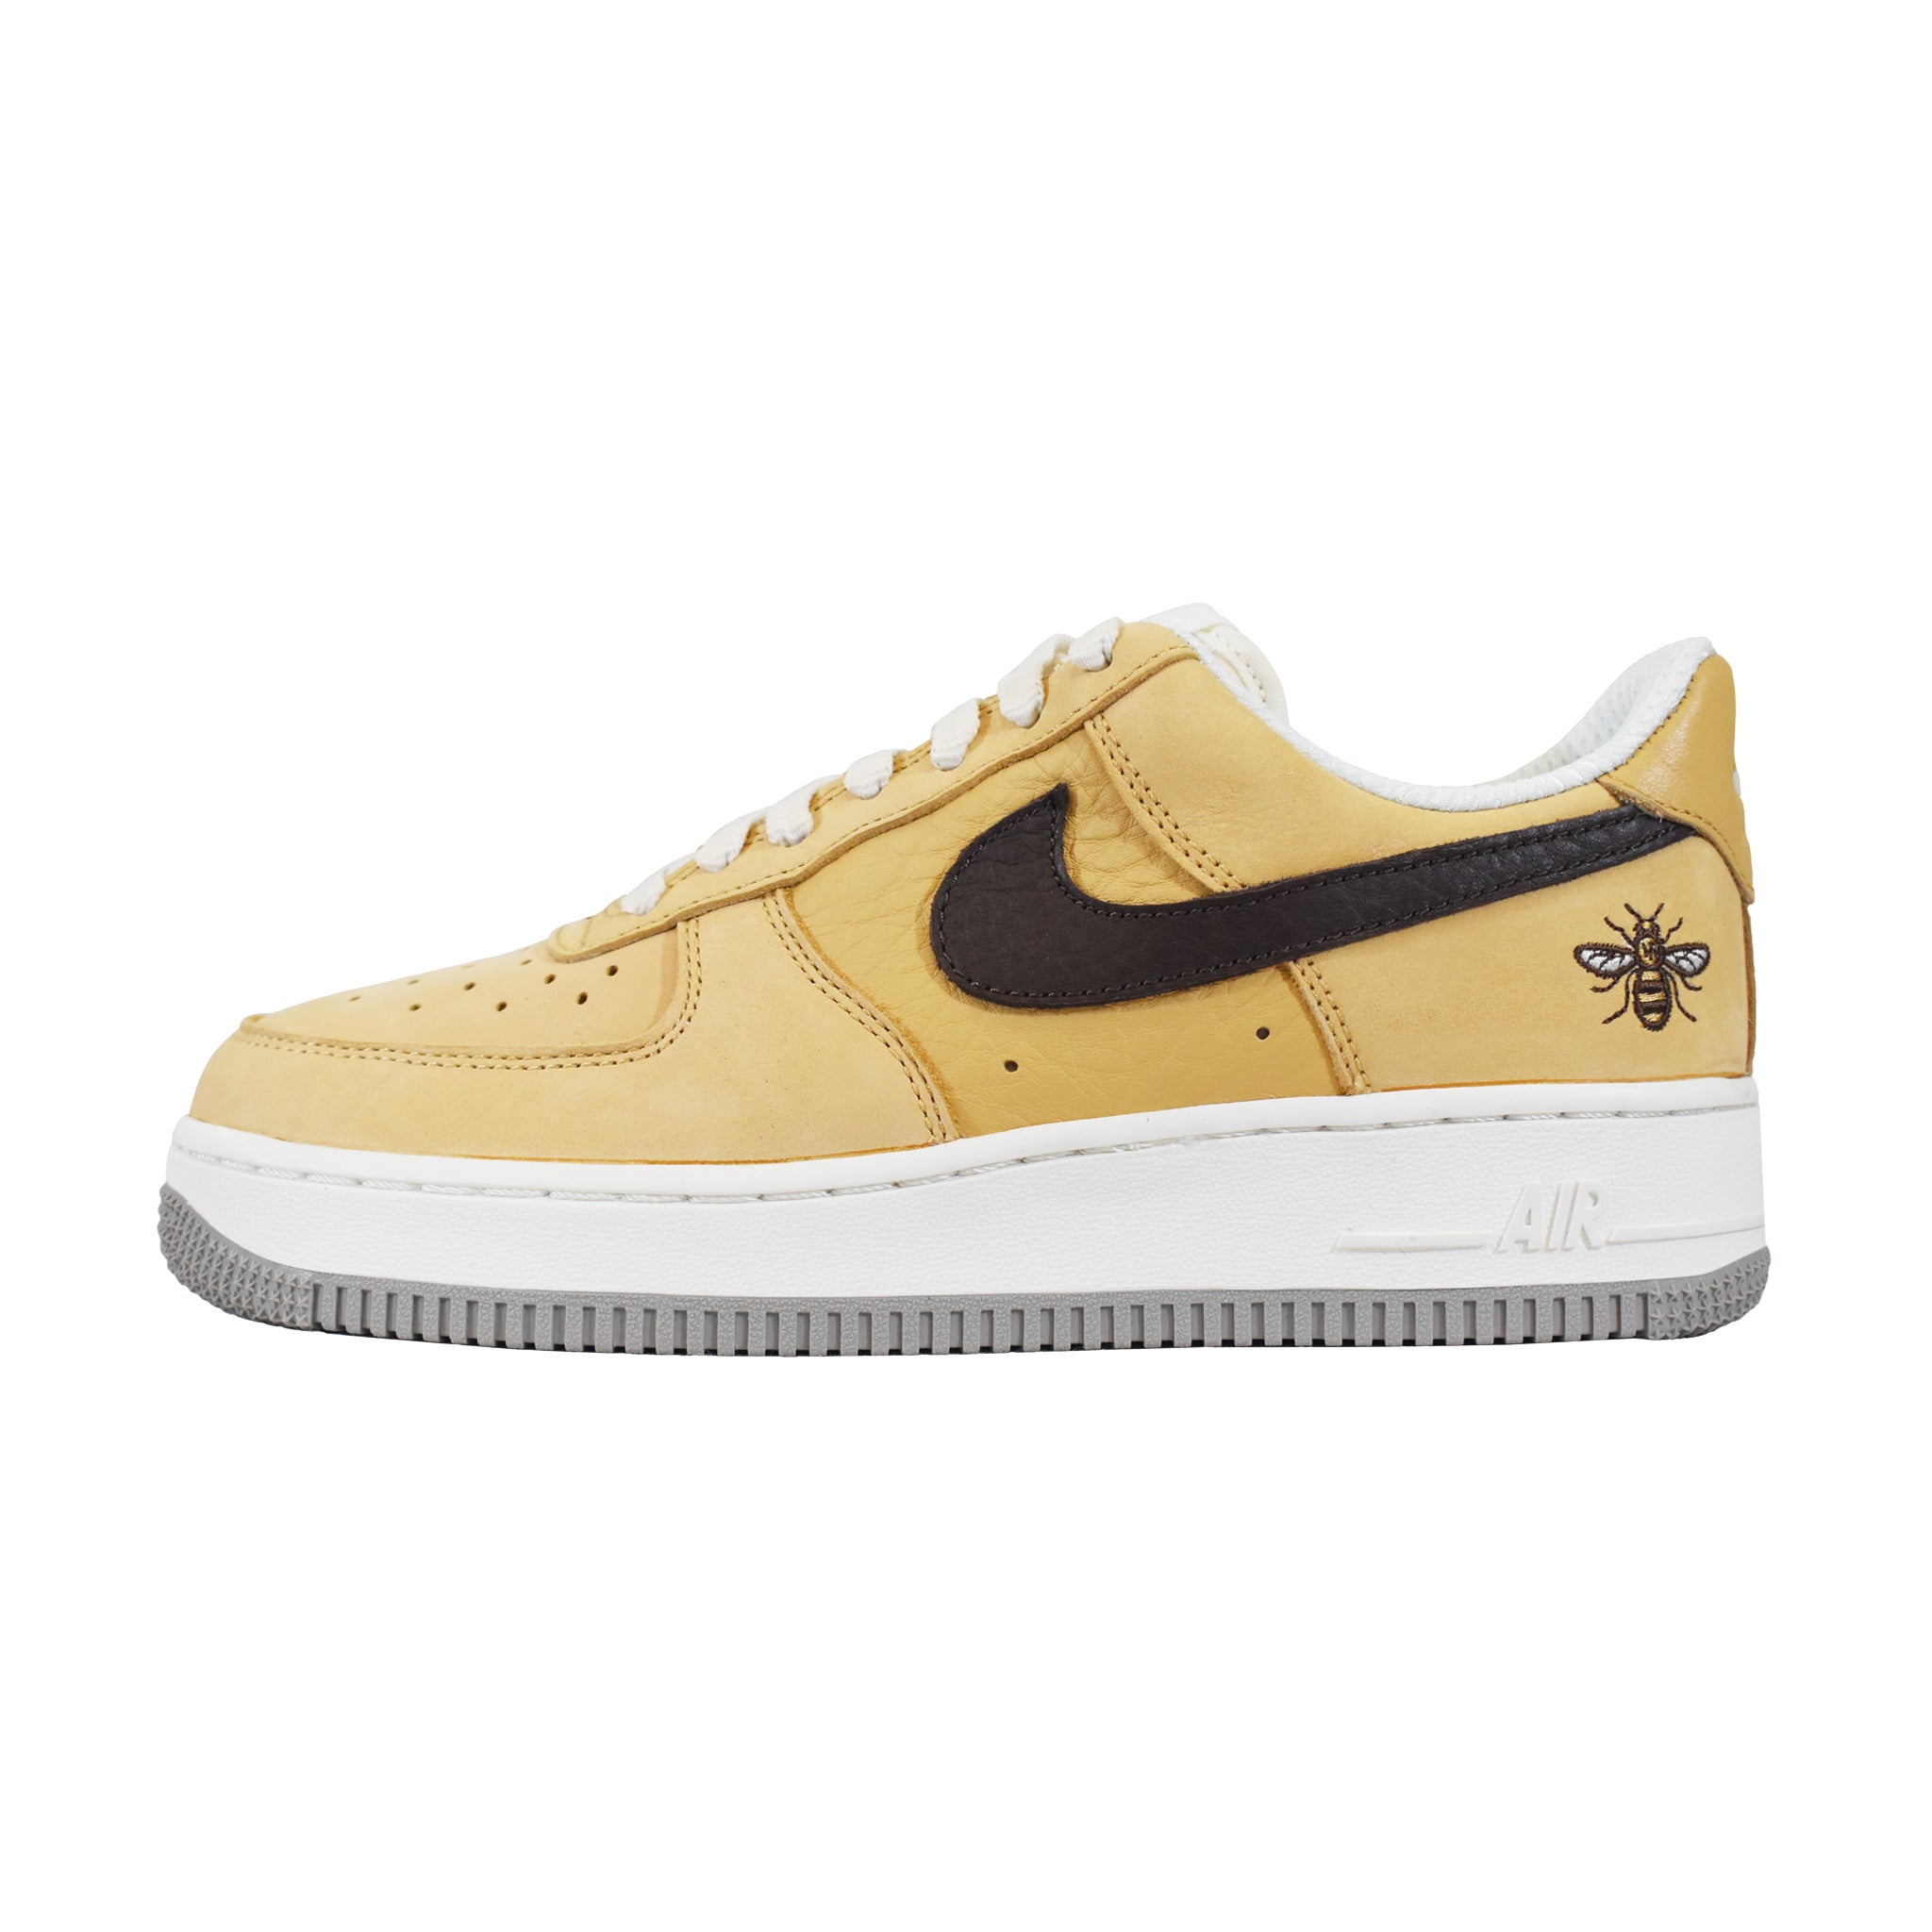 Nike Air Force 1 Low x SIZE - Manchester Bee | Points Streetwear ...